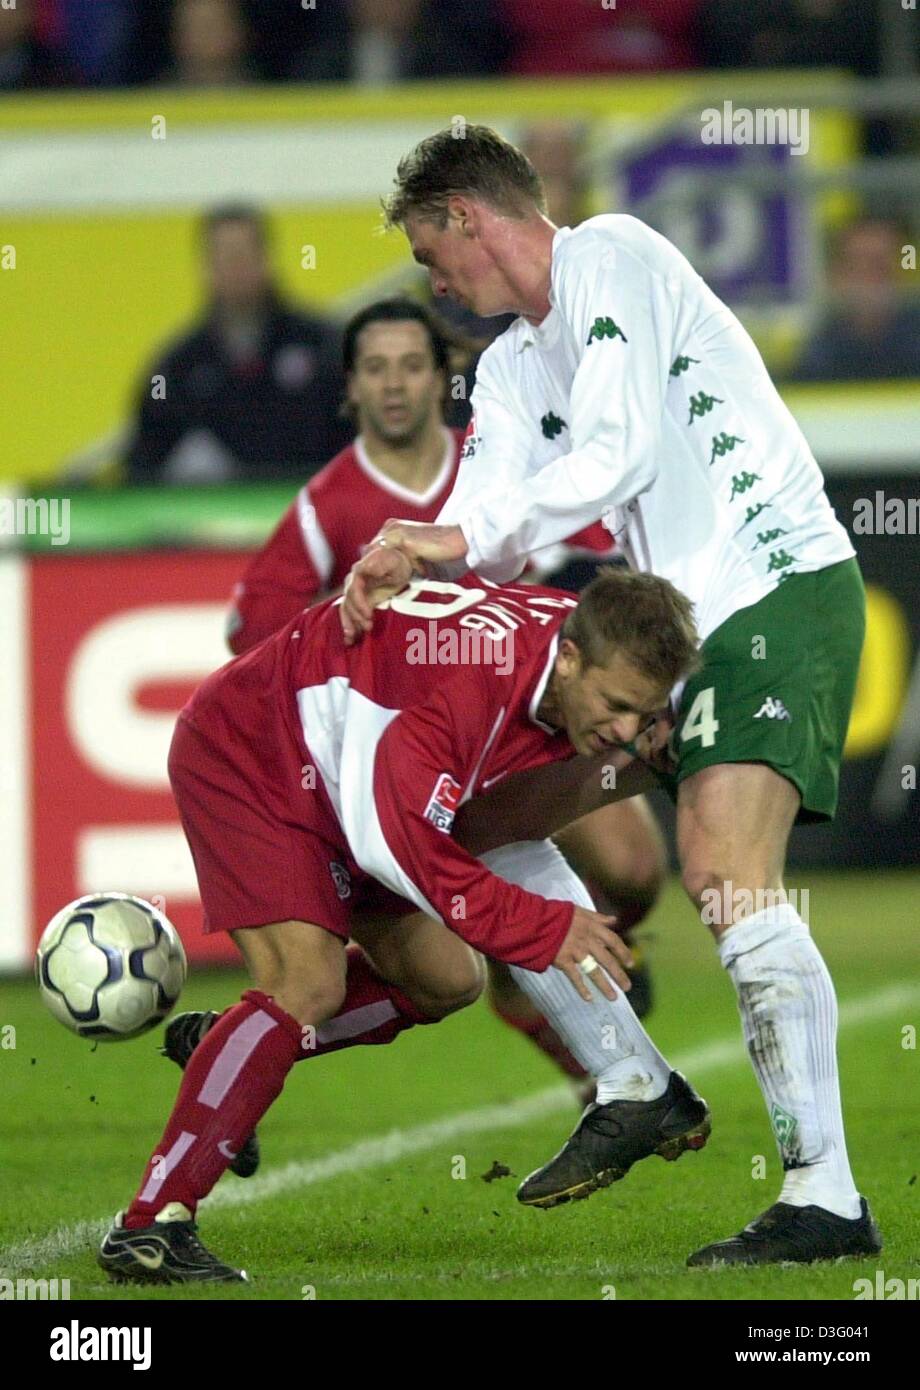 (dpa) - Kaiserslautern's midfielder Markus Anfang (L) collides with Bremen's midfielder Tim Borowski during the German DFB-Pokal (DFB Cup) semifinal soccer game 1st FC Kaiserslautern against Werder Bremen in Kaiserslautern, Germany, 4 March 2003. Kaiserslautern wins 3-0 and reaches the final for the seventh time. Stock Photo